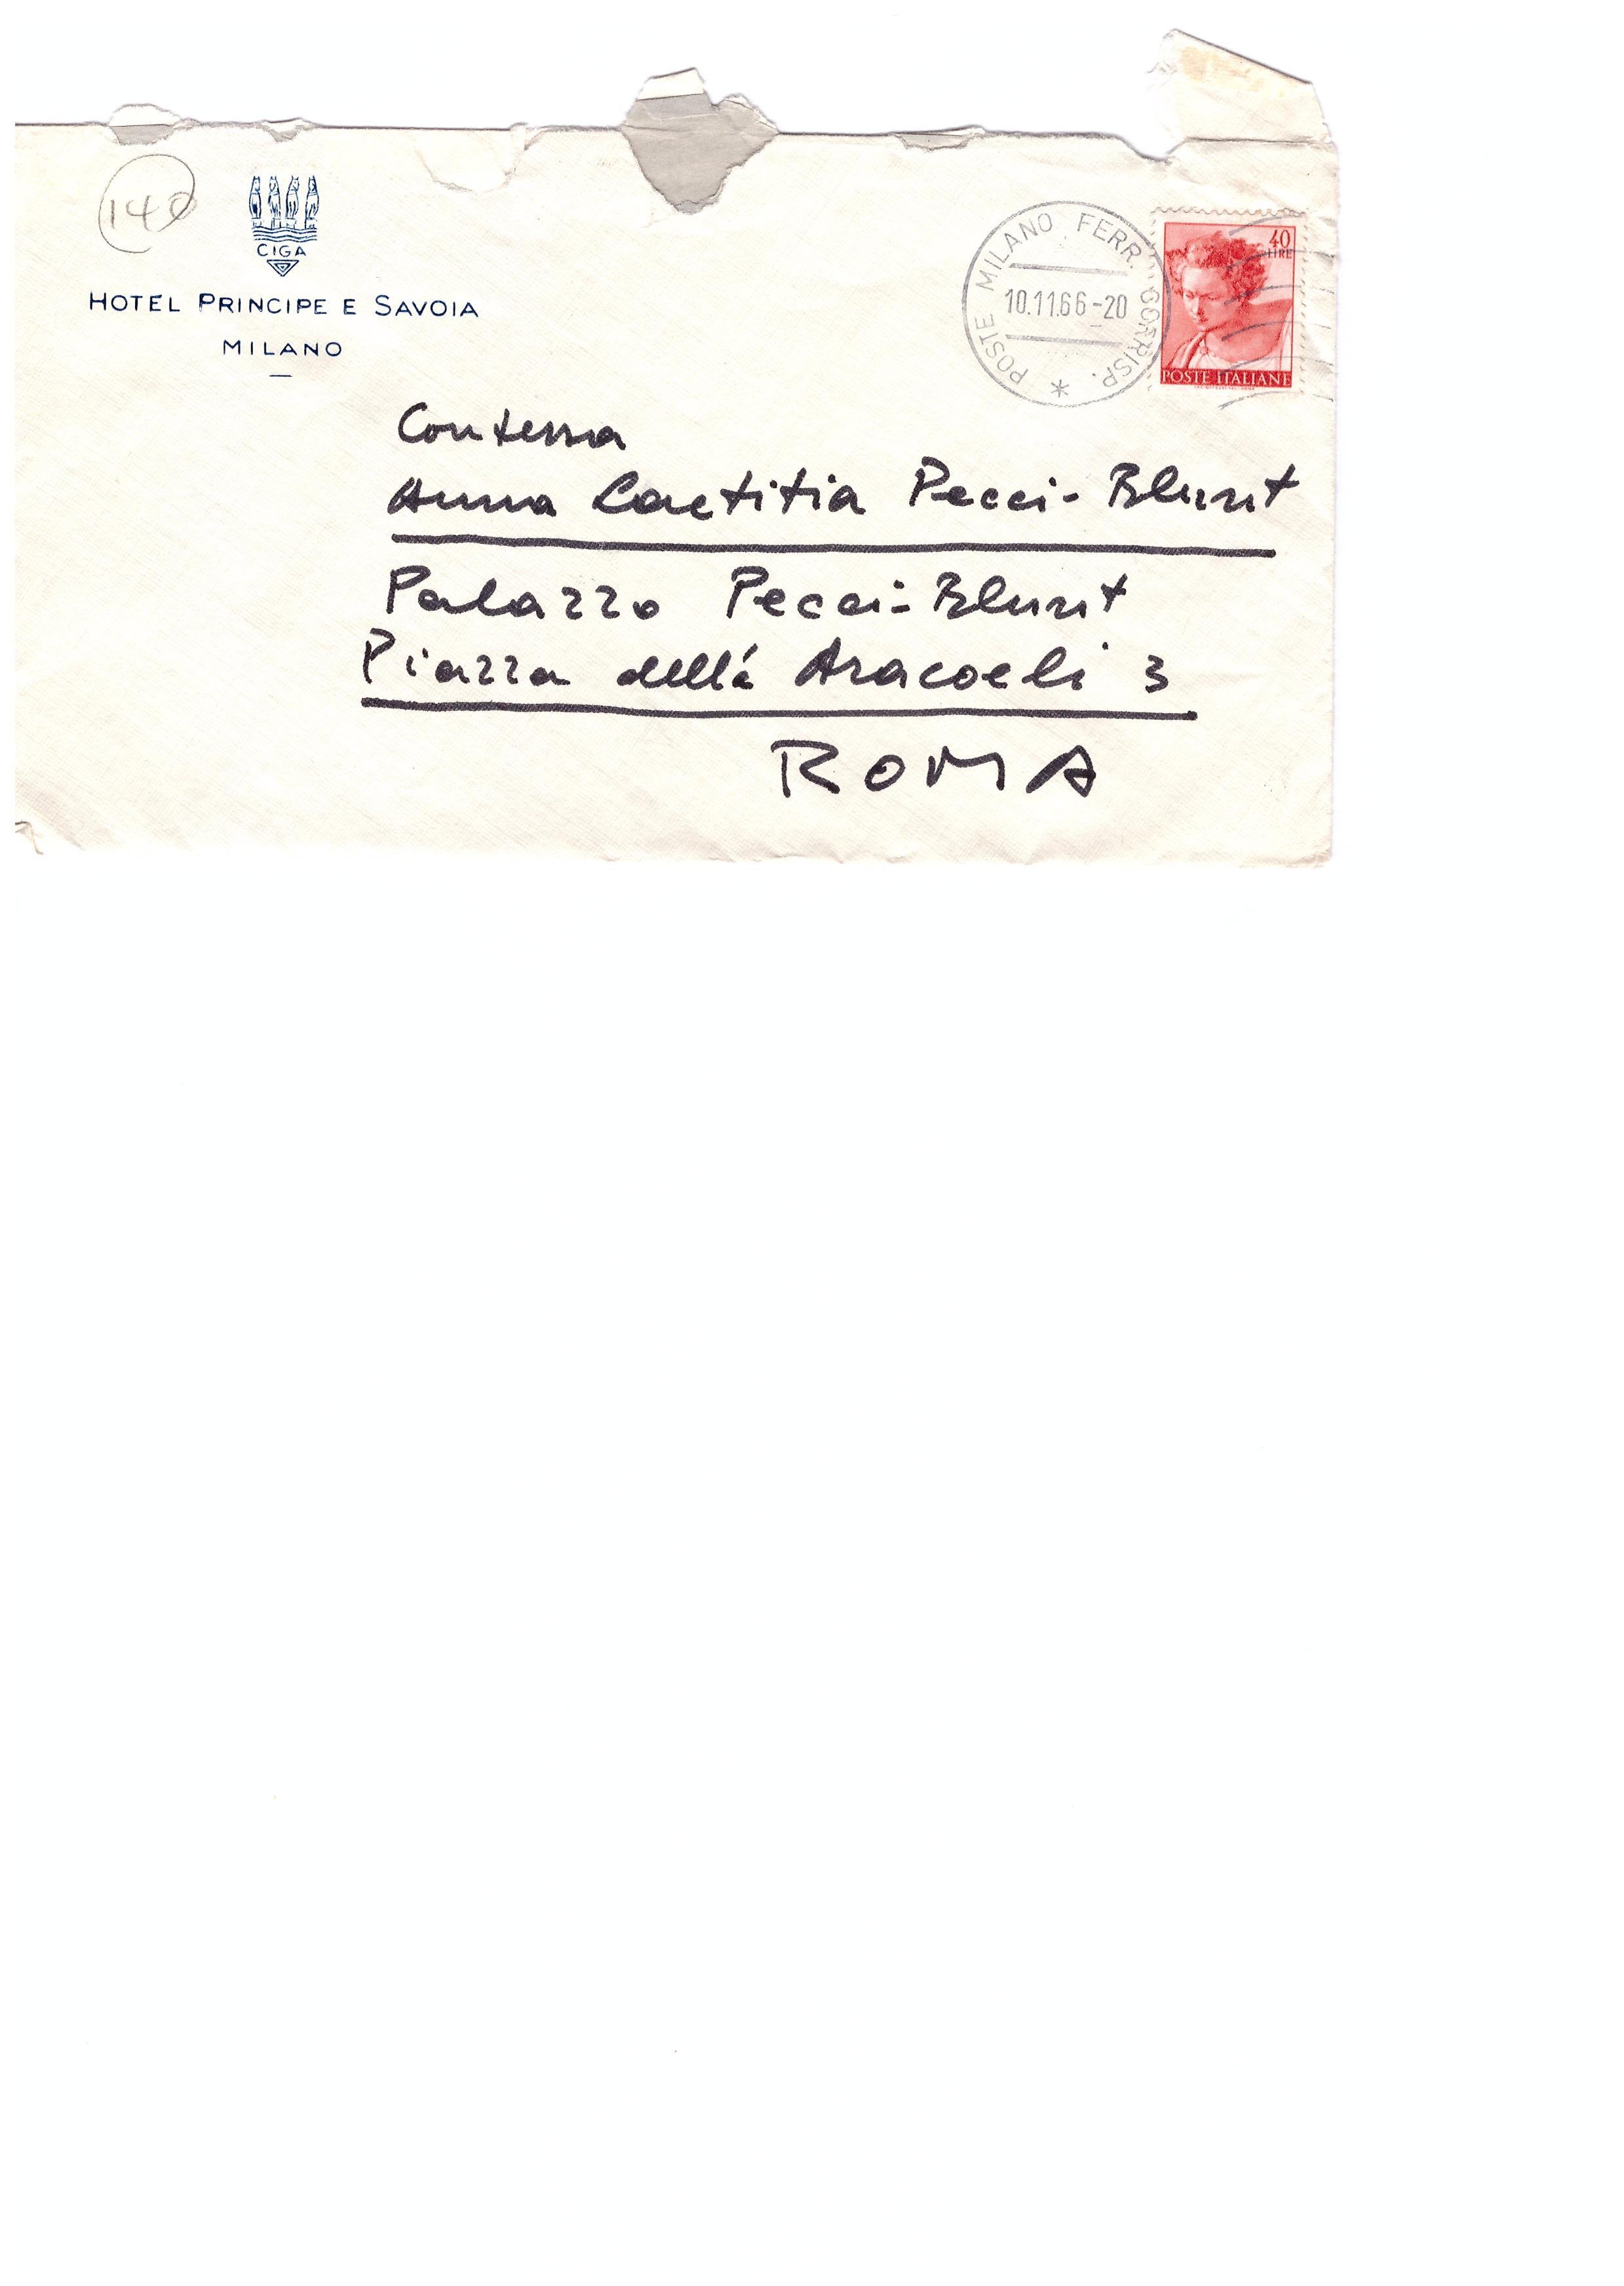 Correspondence by Romolo Valli to the Countess Mimi Pecci Blunt. The setincludes: 2 postcards signed (dated 1960 and 1963, dimensions 14,5 x 9,5 cm and 14 x 9 cm), a one letter signed (2 pages, envelope included, dated 1966, dimensions 24,5 x 16,5